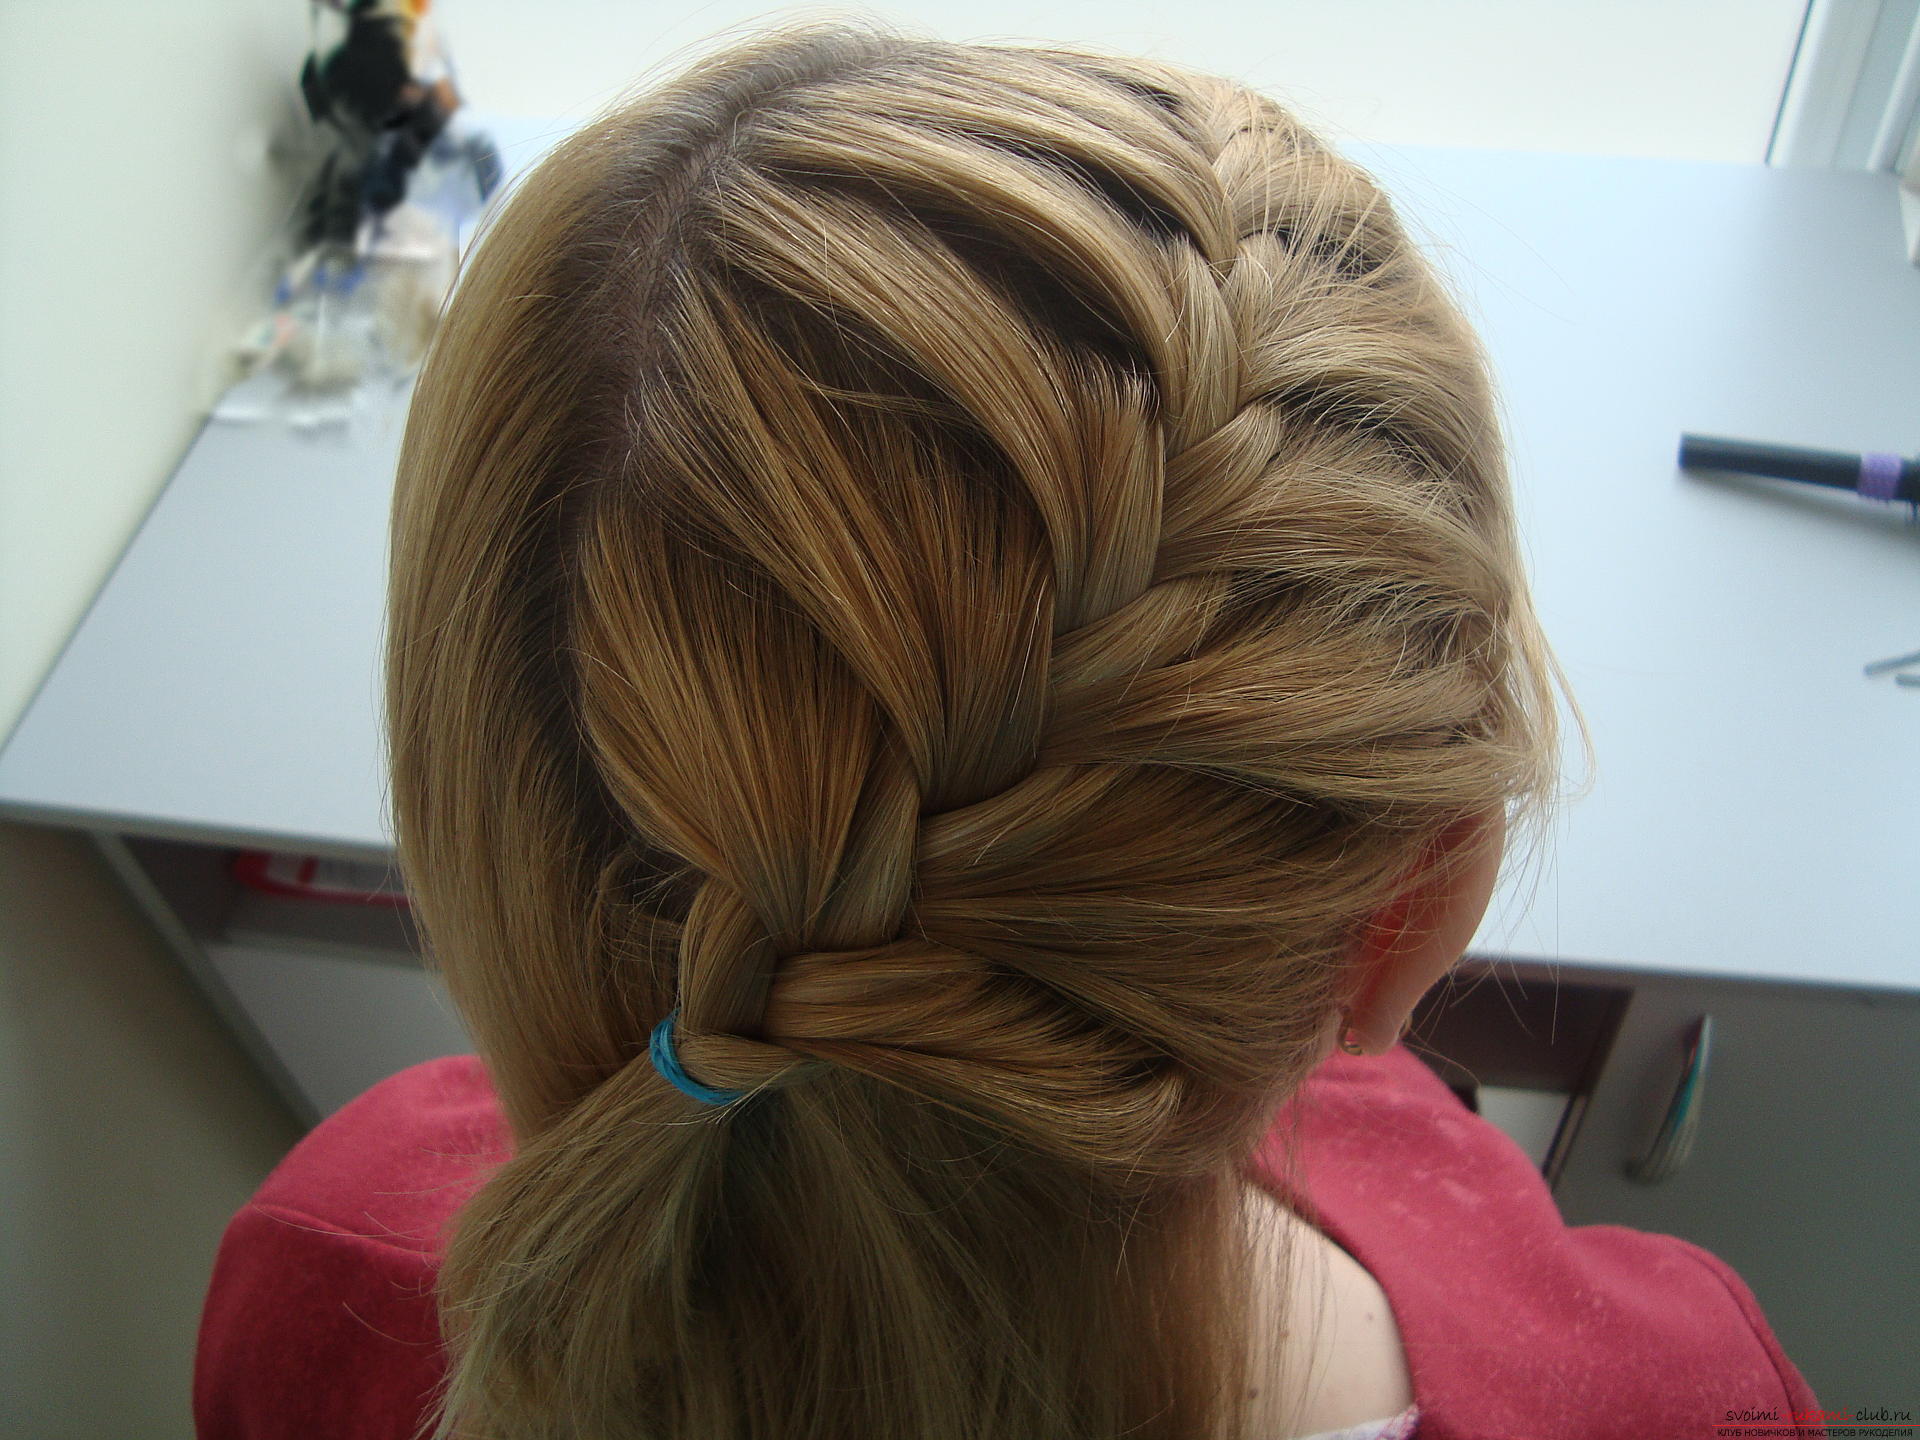 Master class hairstyles with photos will help you create the most beautiful hairstyle for the new year. Hairstyles for medium hair on the basis of braids will last the whole evening and porozyat originality .. Photo №6